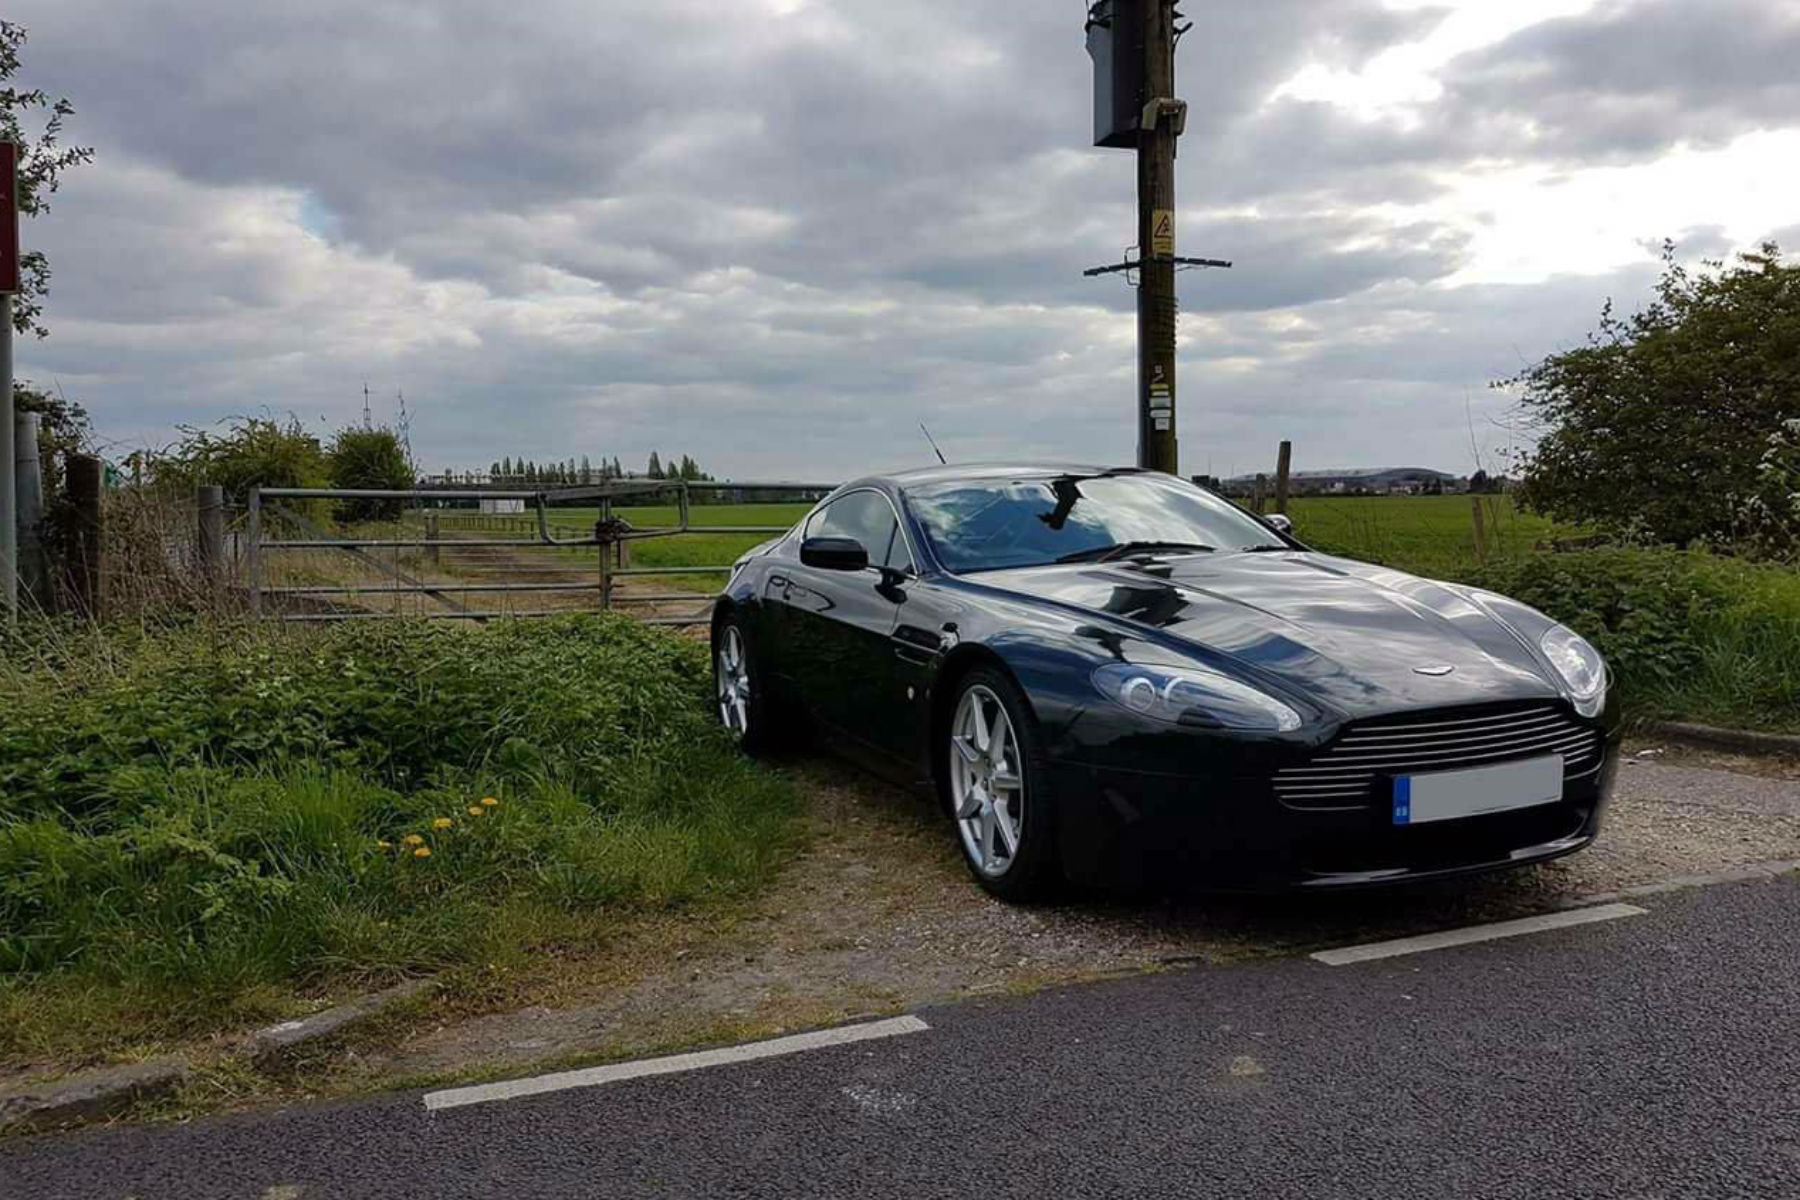 You can now buy an Aston Martin V8 Vantage for £30,000